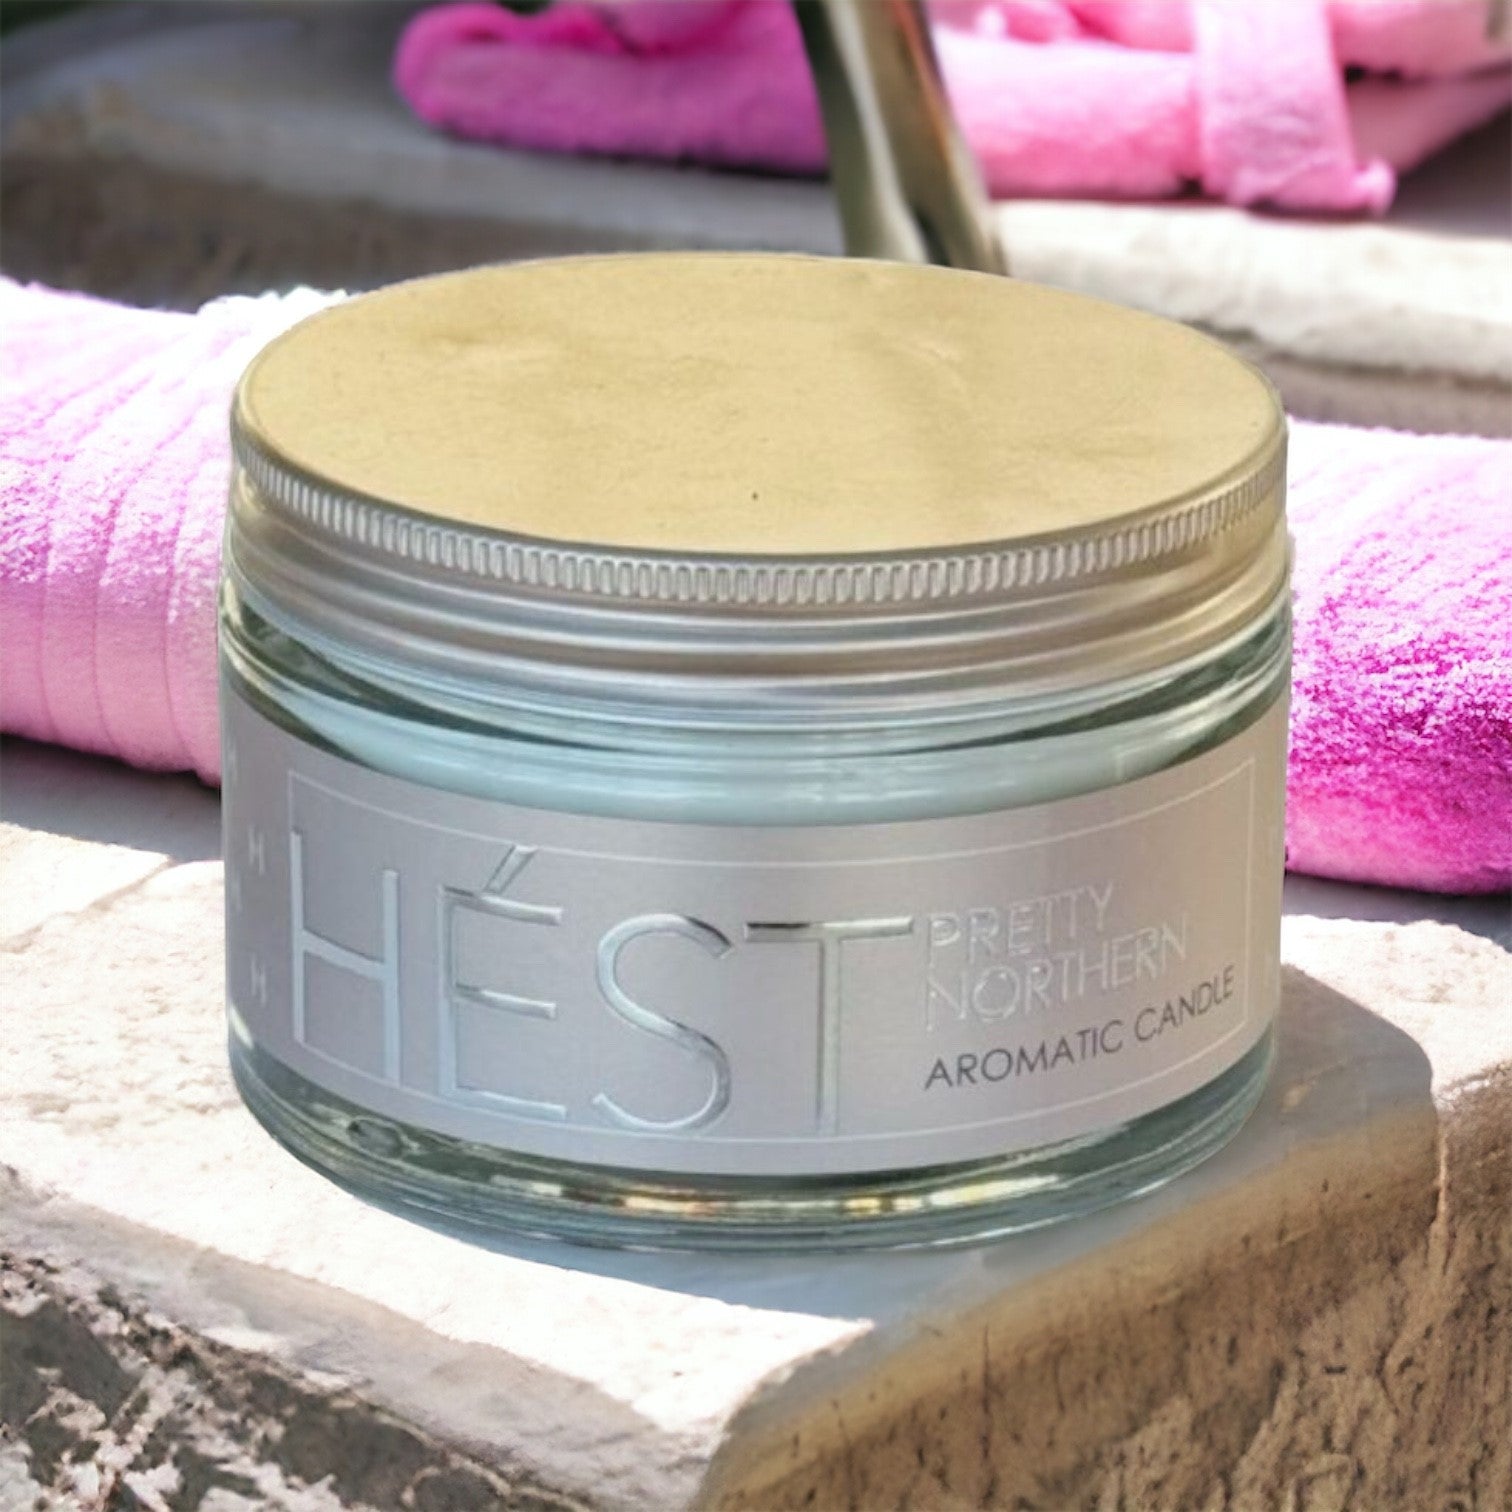 HÉST Aromatic Candle - Pretty Northern